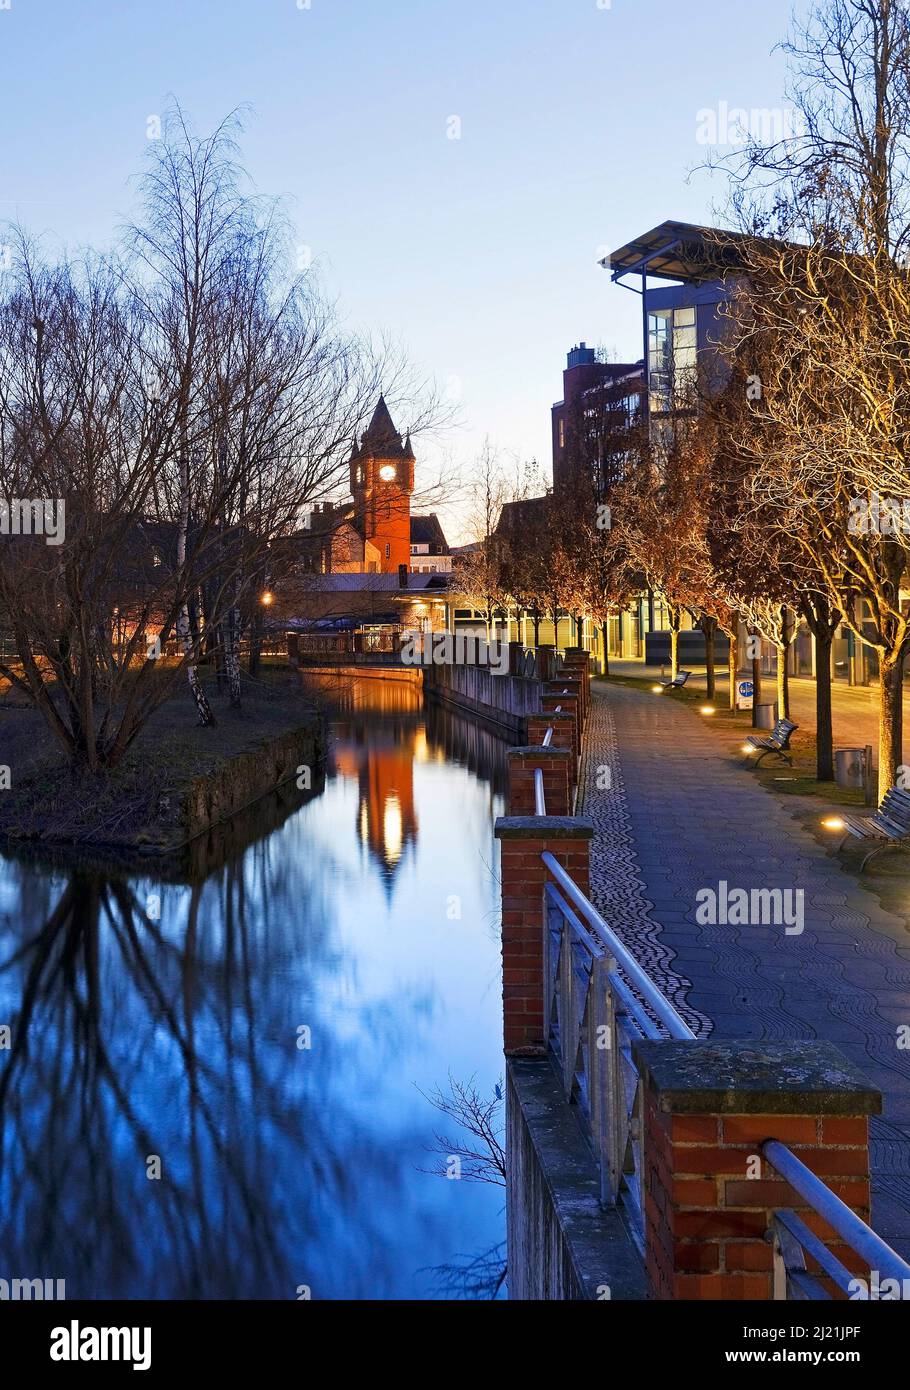 Old town hall tower with river Dinkel in the evening, Germany, North Rhine-Westphalia, Muensterland, Gronau Stock Photo